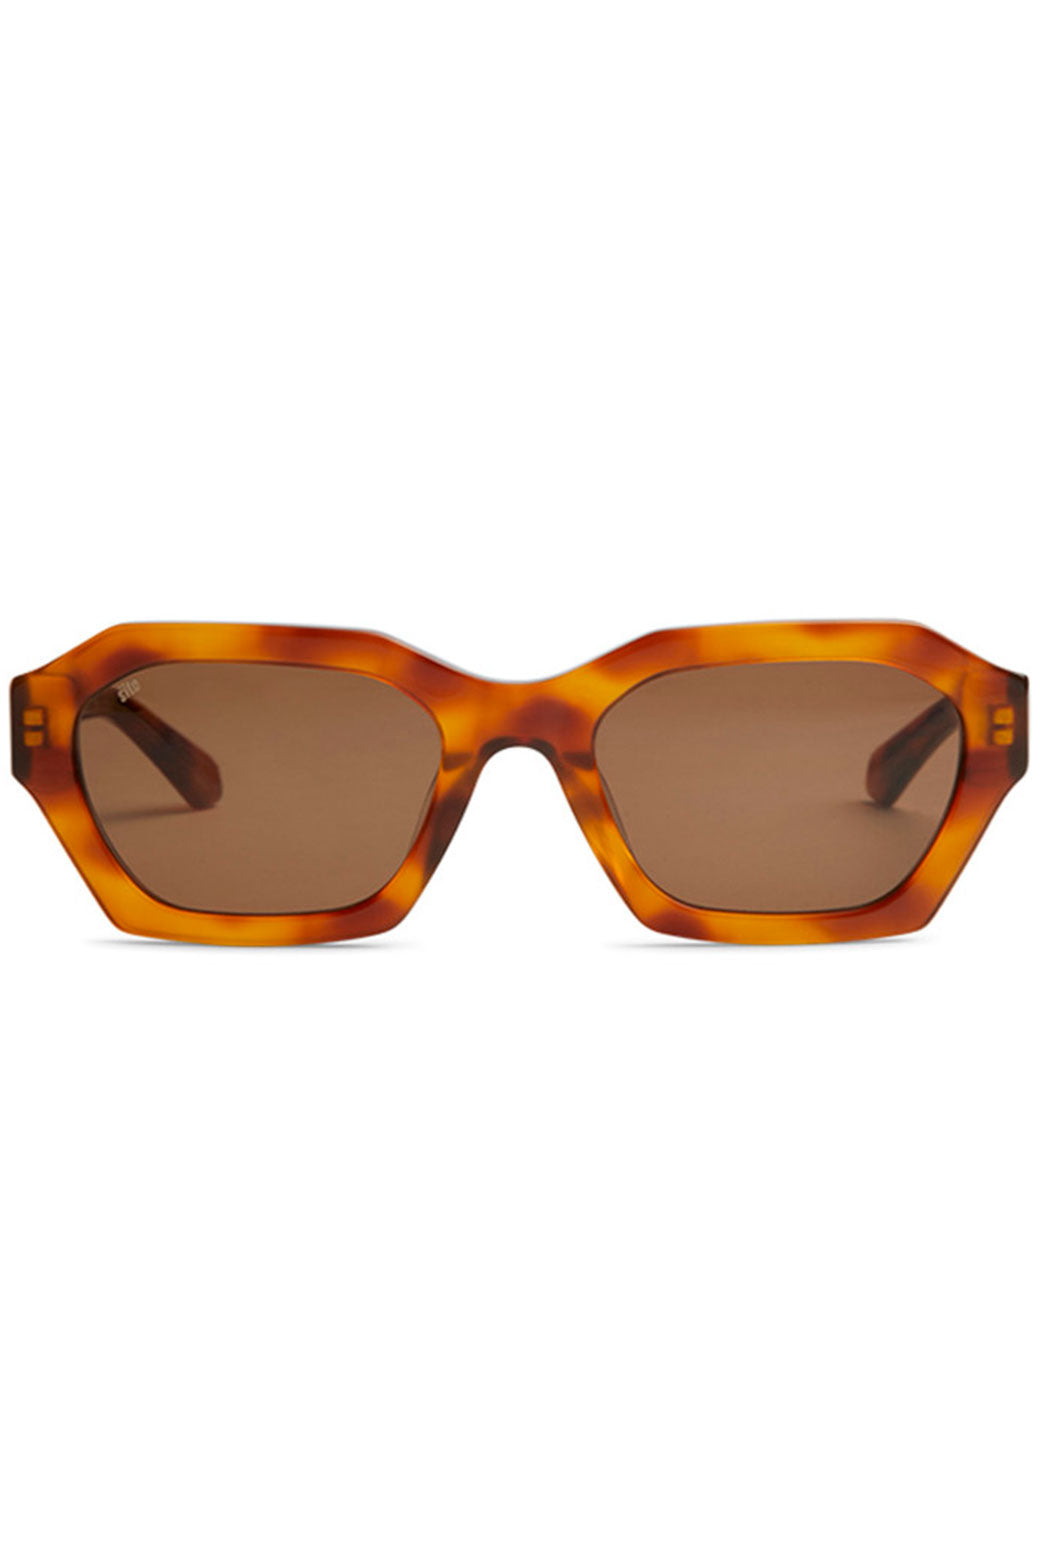 Sito Kinetic Amber Tort/Coffee